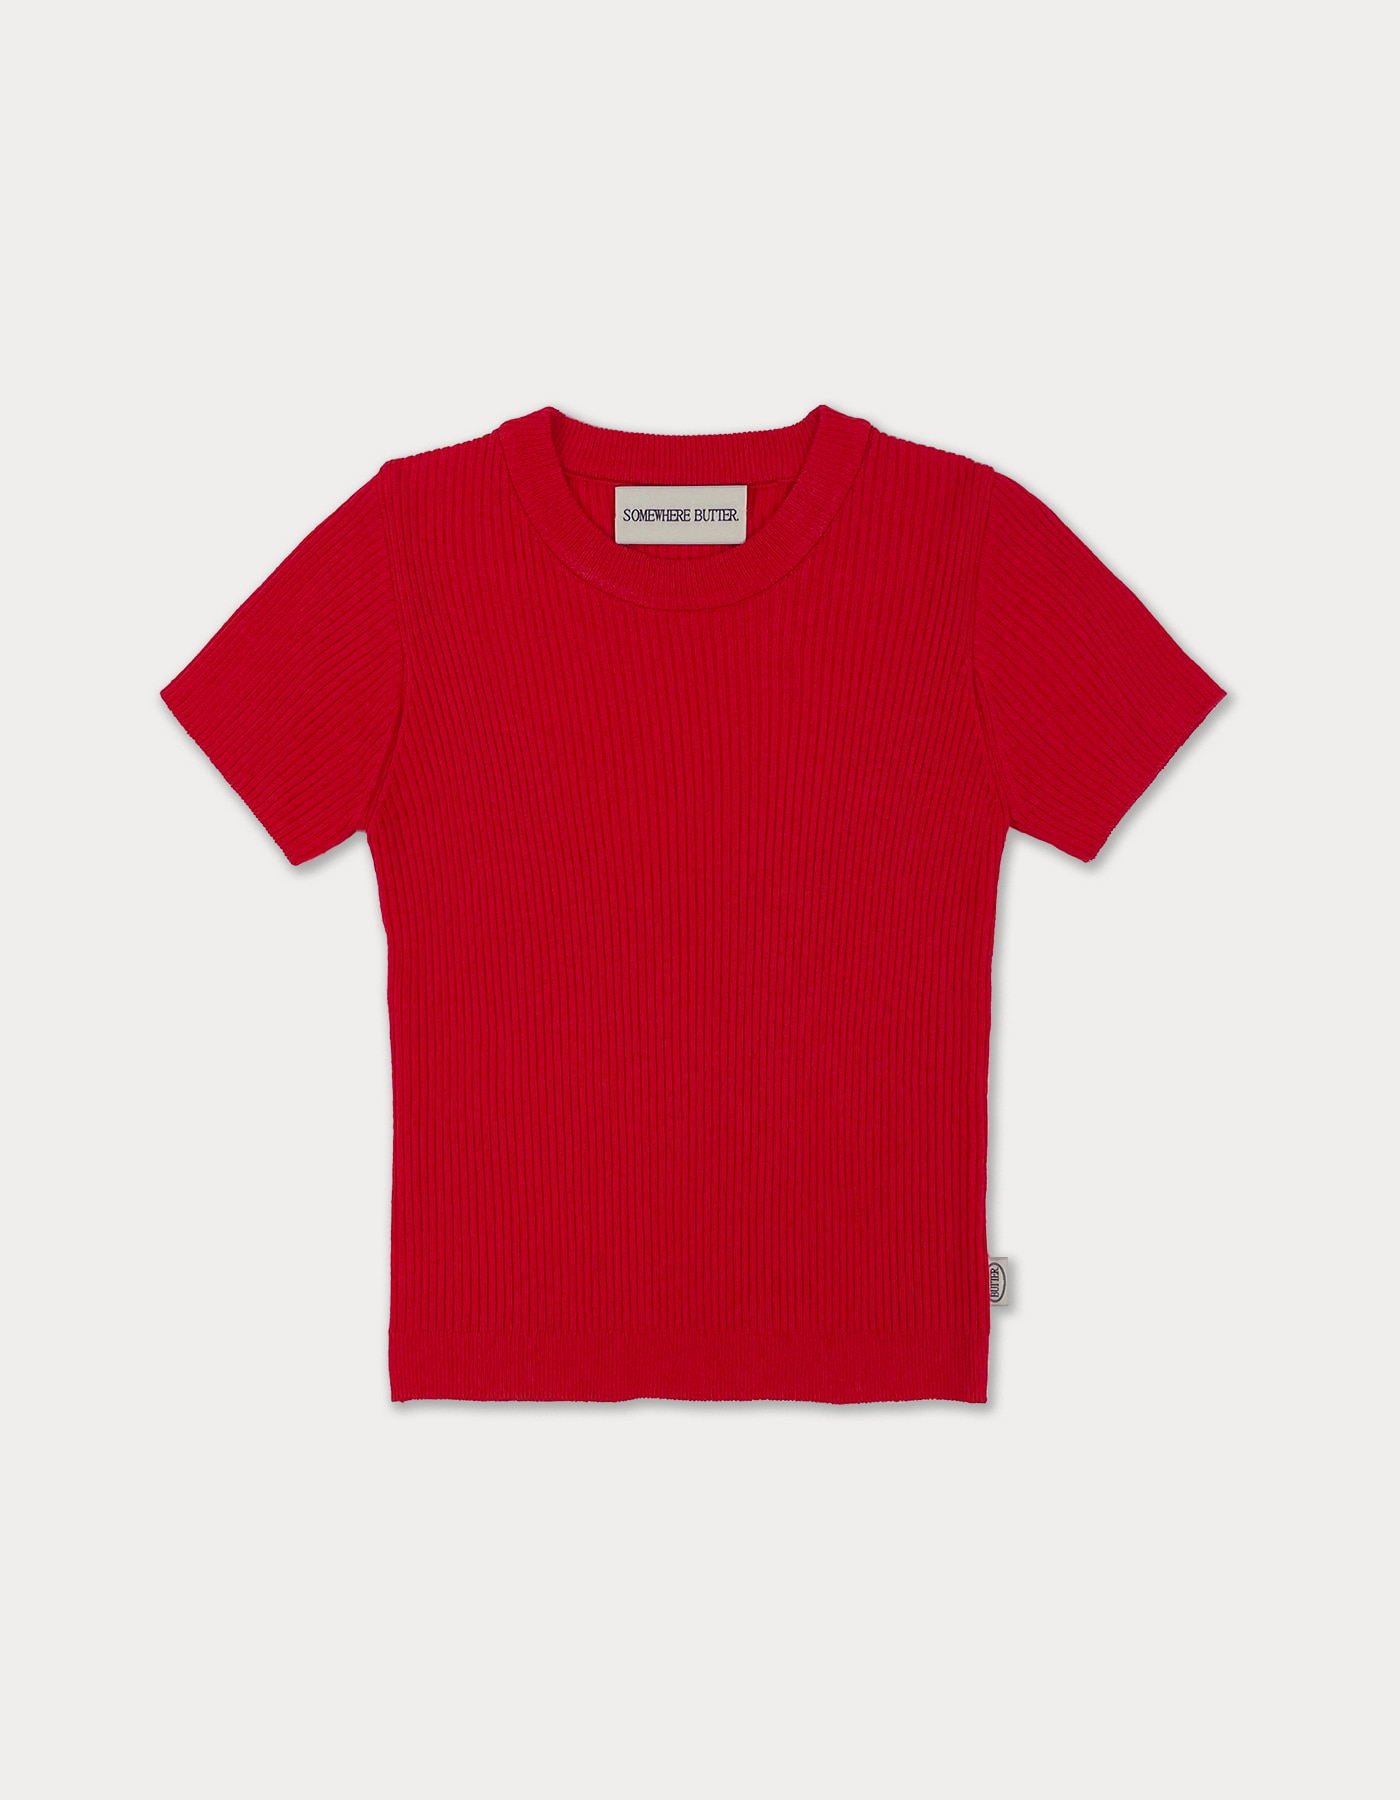 butter essential top - red